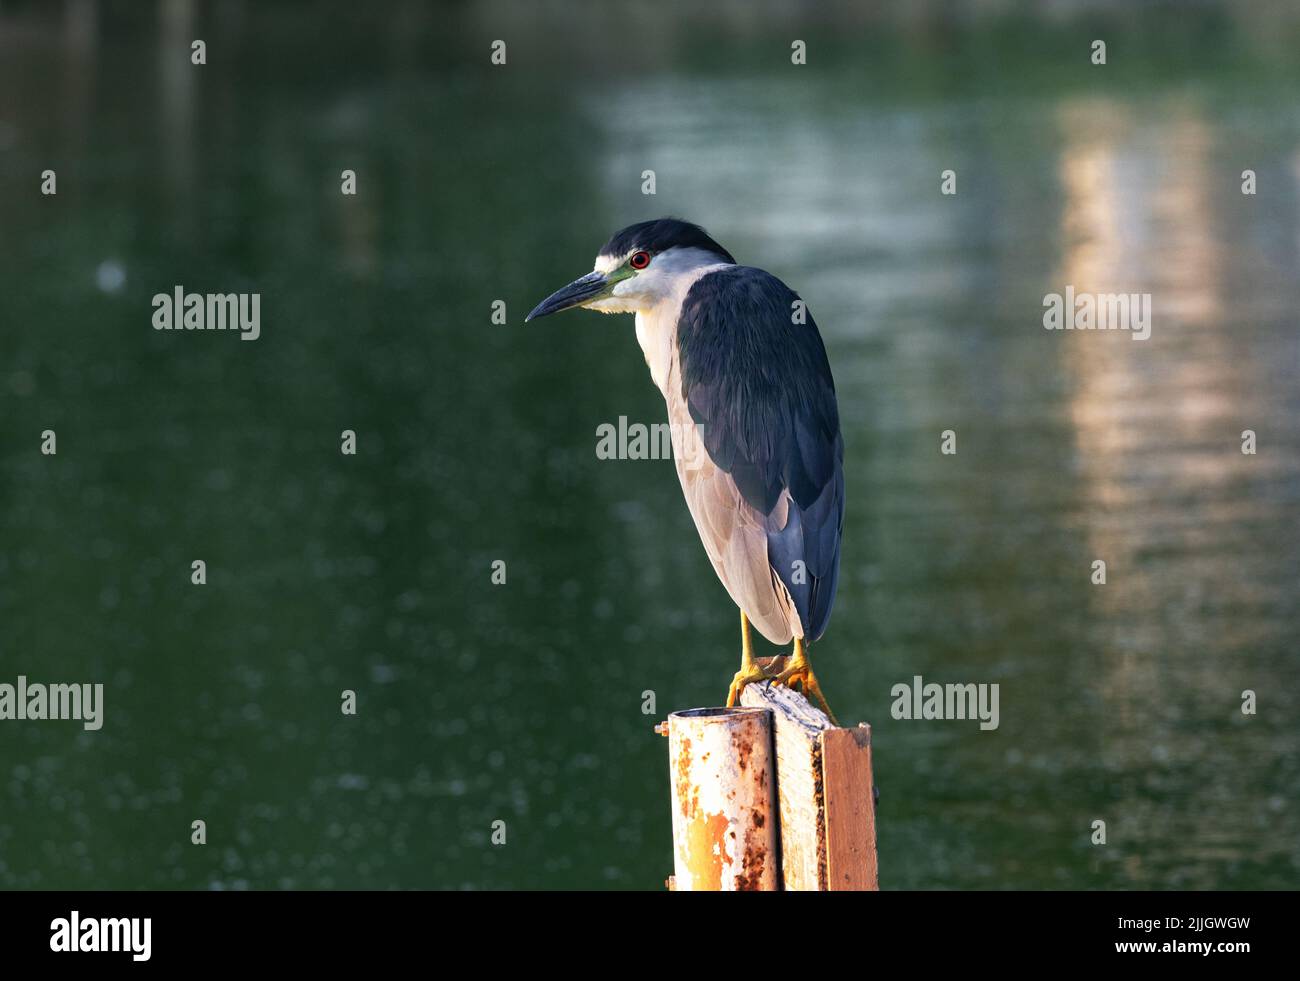 City birding brings male Night Heron on pond post at historic Fort Lowell Park in Tucson, Arizona, USA Stock Photo